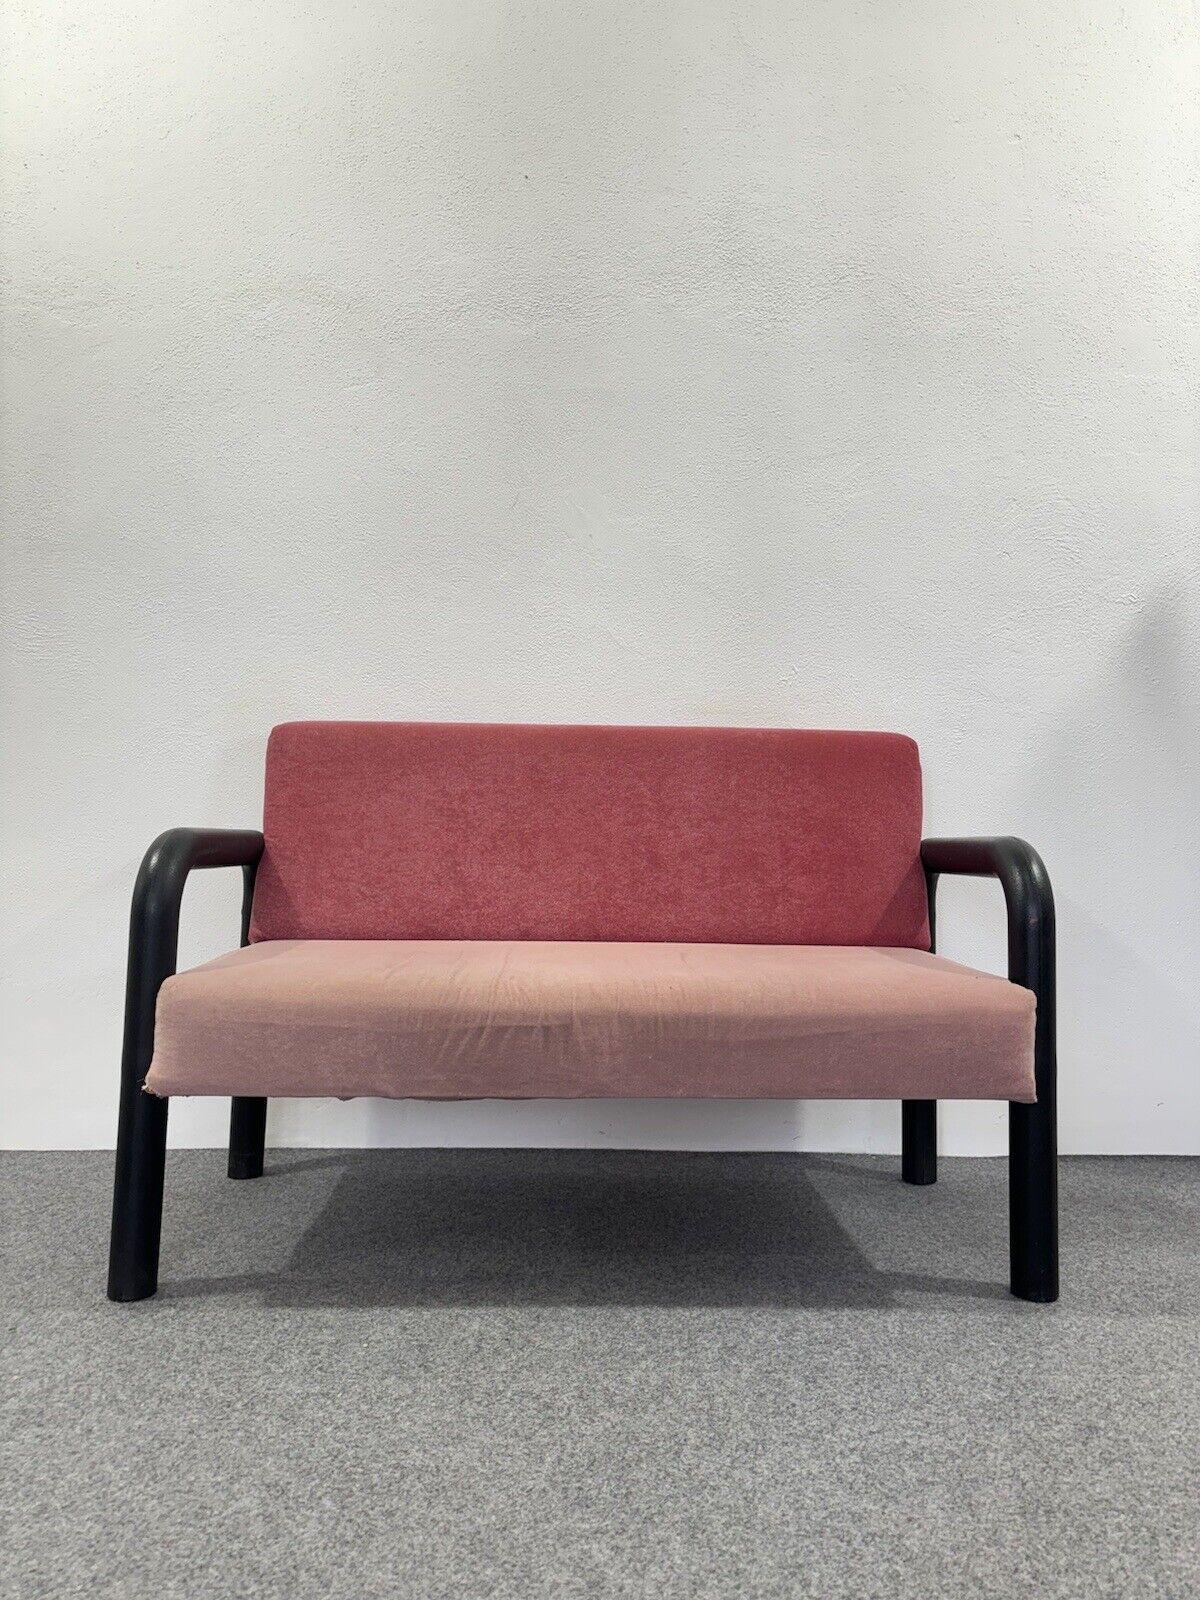 Post-Modern Memphis Style Two Seater Sofa Design Postmodern Modernism 1980s For Sale